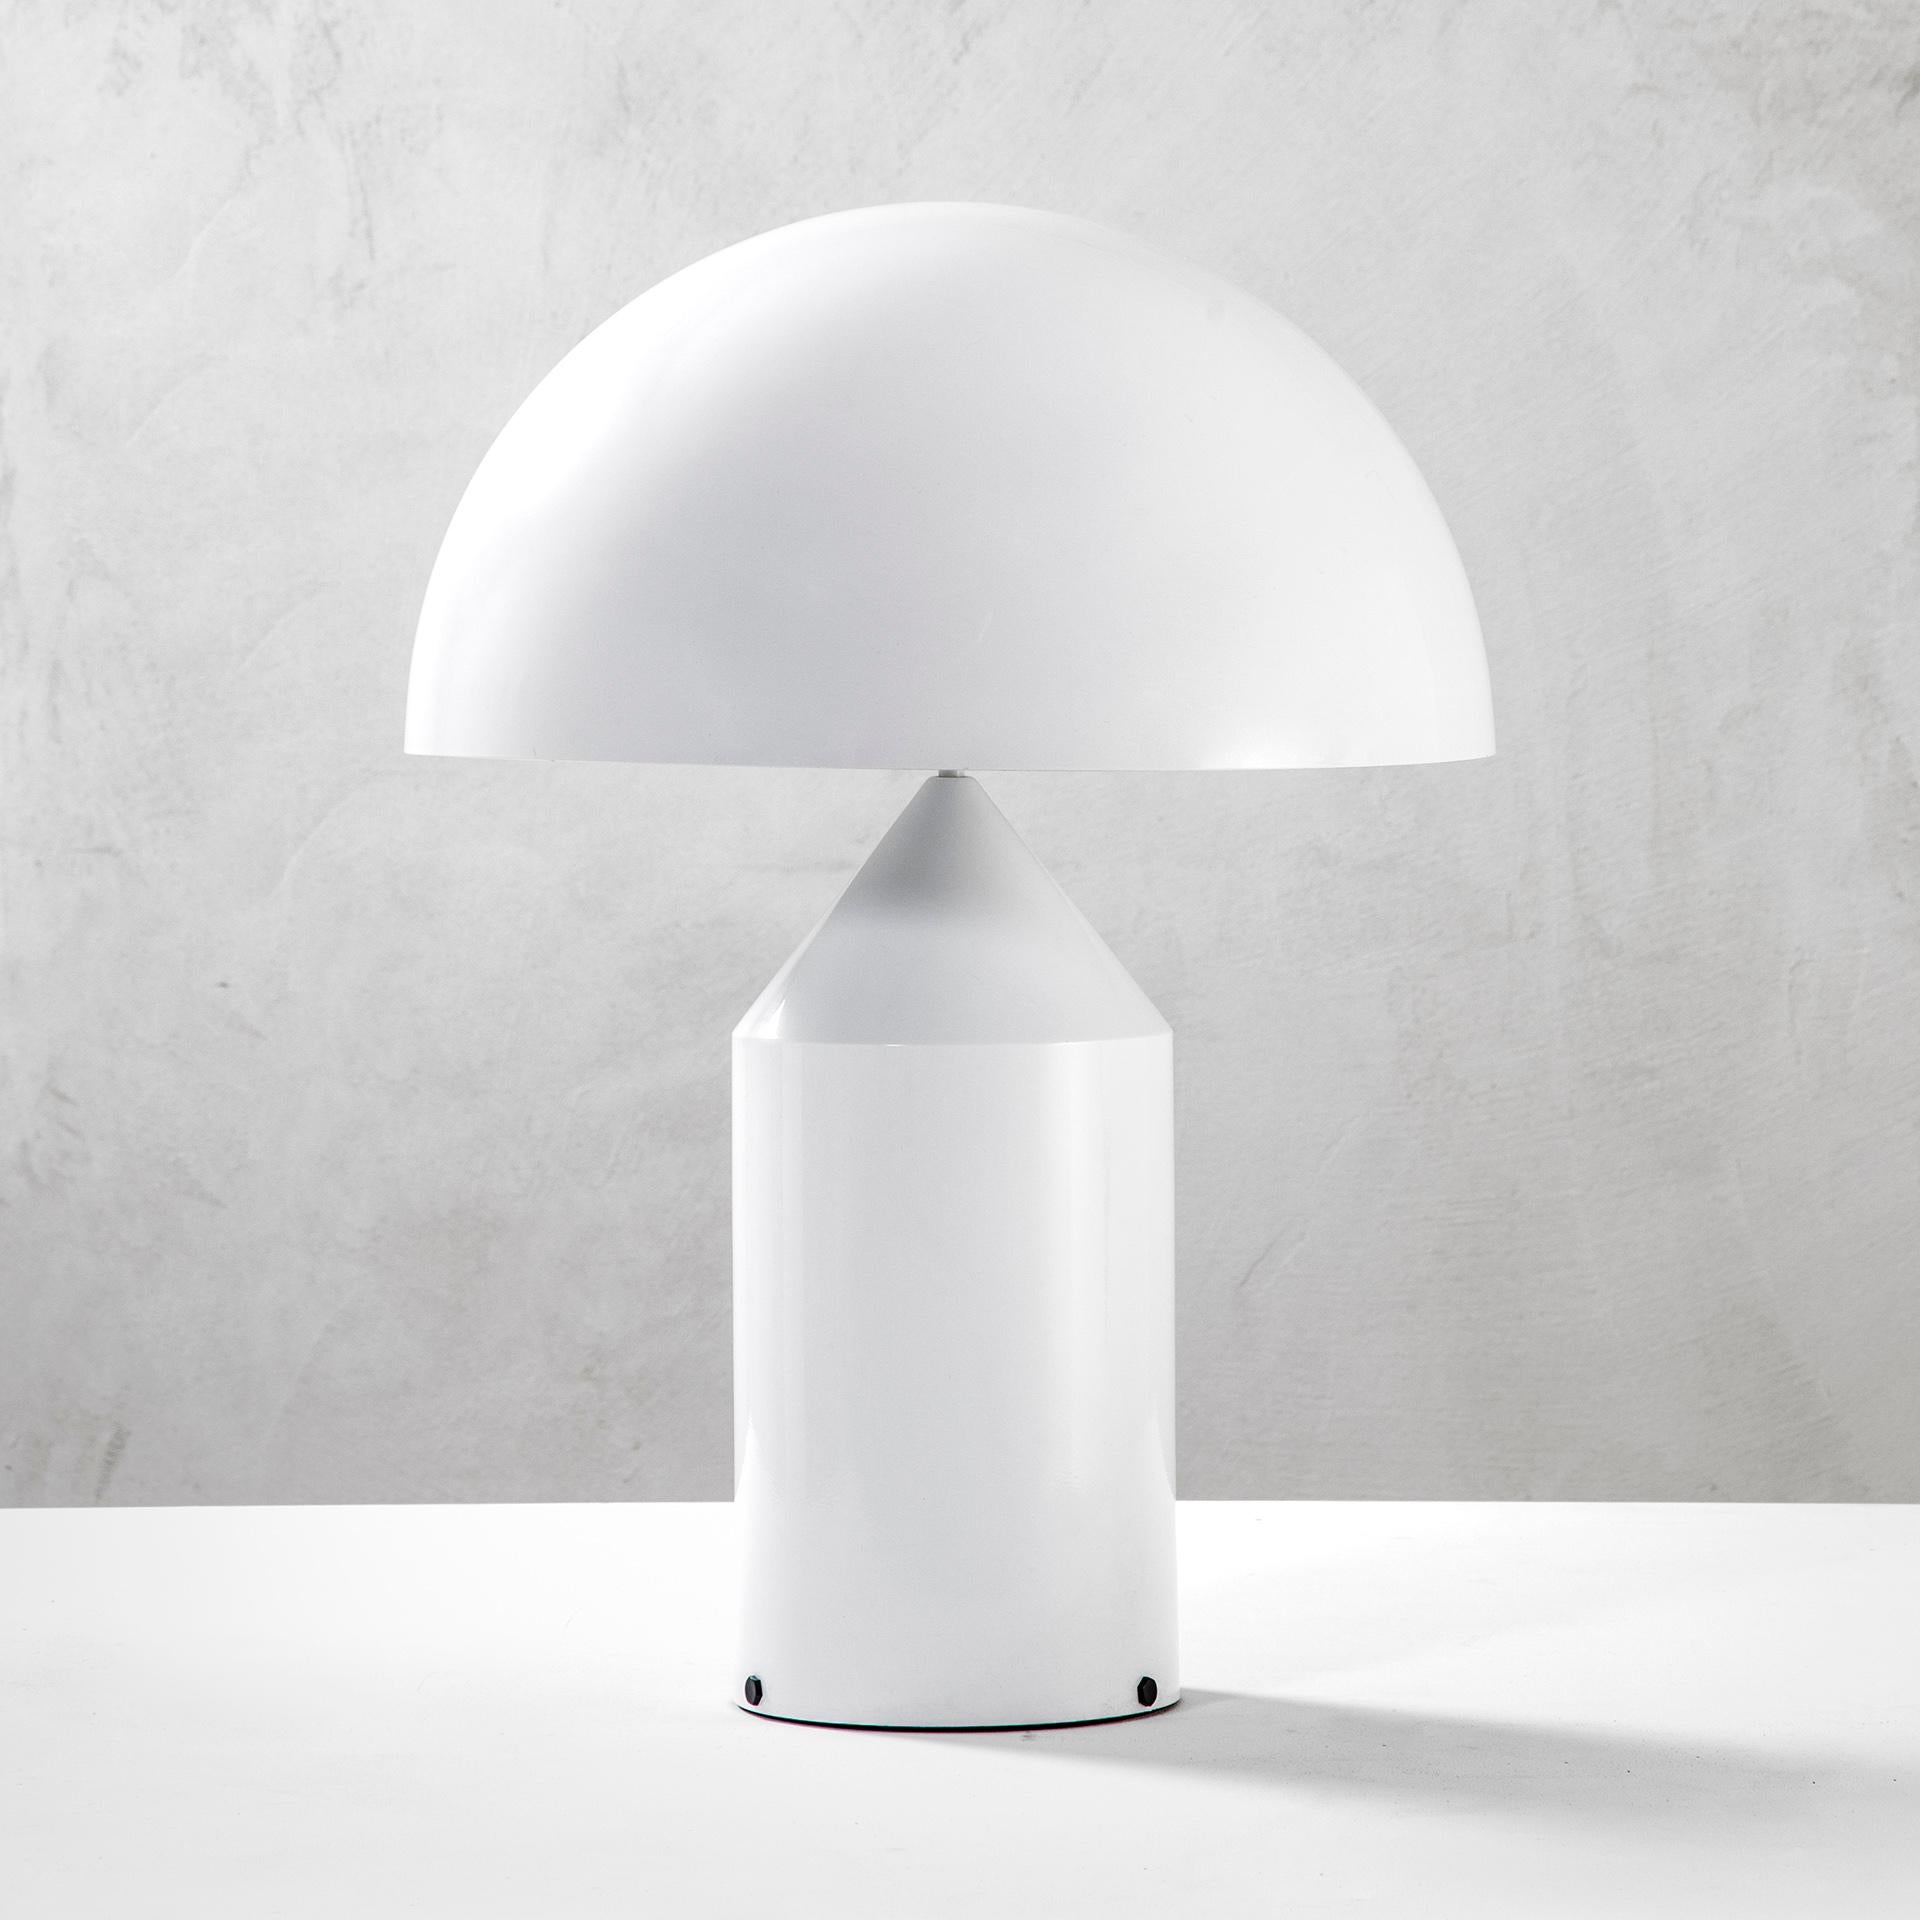 Atollo, for many years now, is no longer a lamp, or rather, it is not just a lamp.
It is a myth, an icon: one of the most accepted symbols in the world of design, one of the very few products that everyone recognizes and calls by name. Designed by